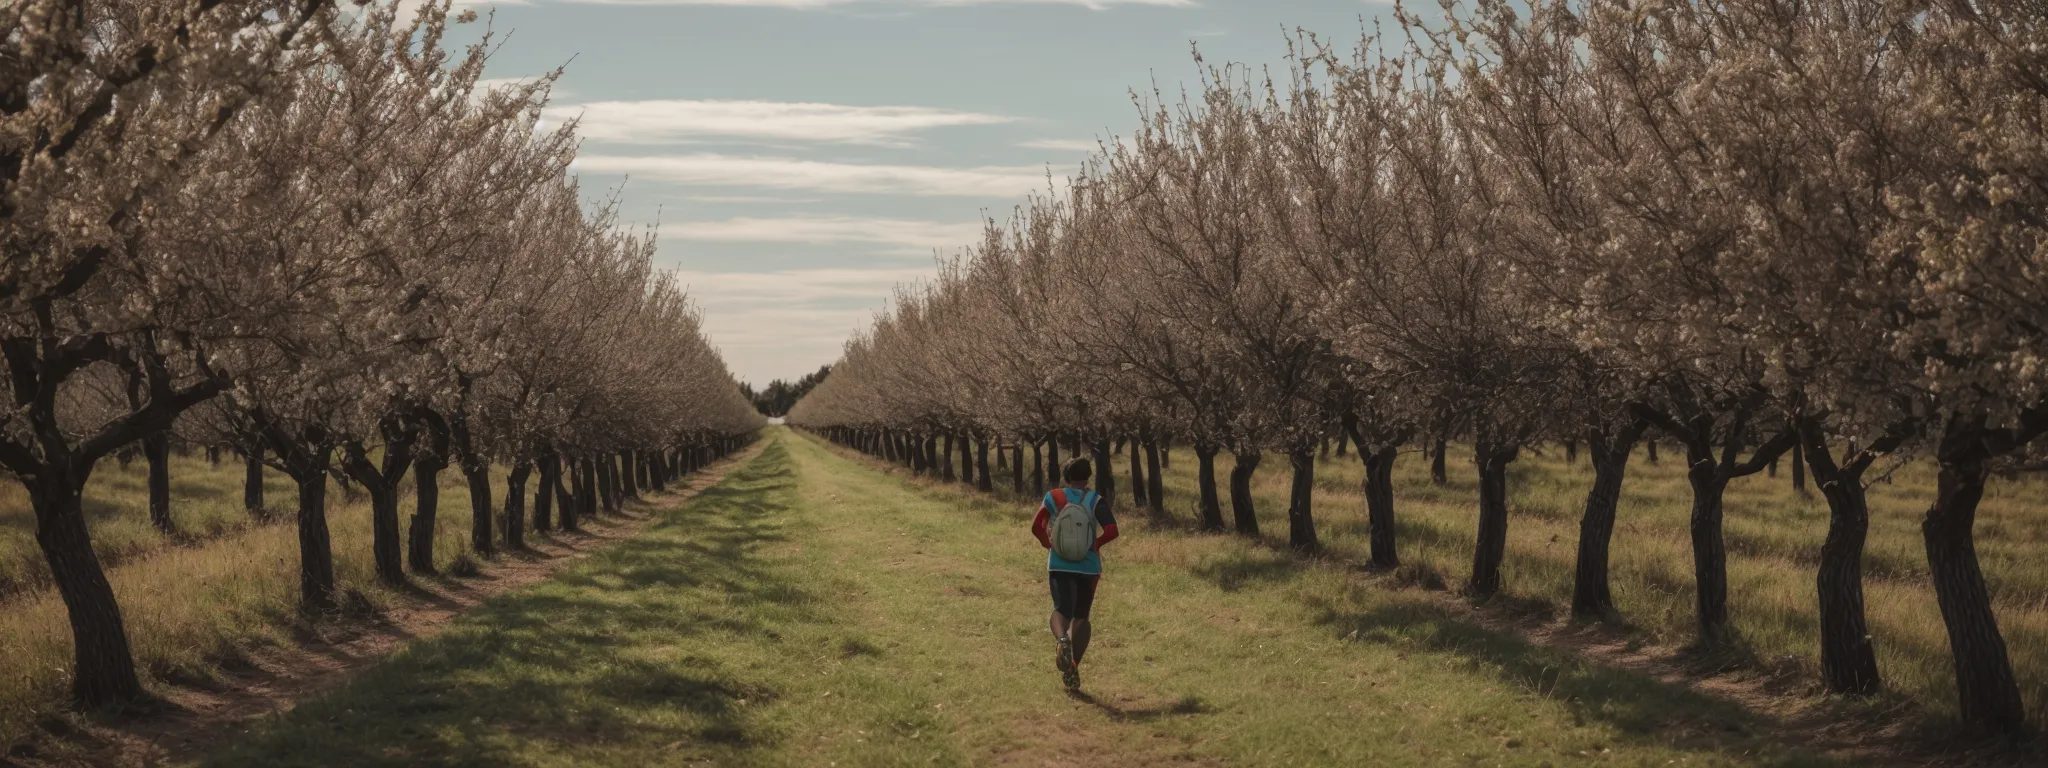 a sprawling orchard with rows of young trees under a wide sky, juxtaposed with a runner poised at the start line on a nearby track.